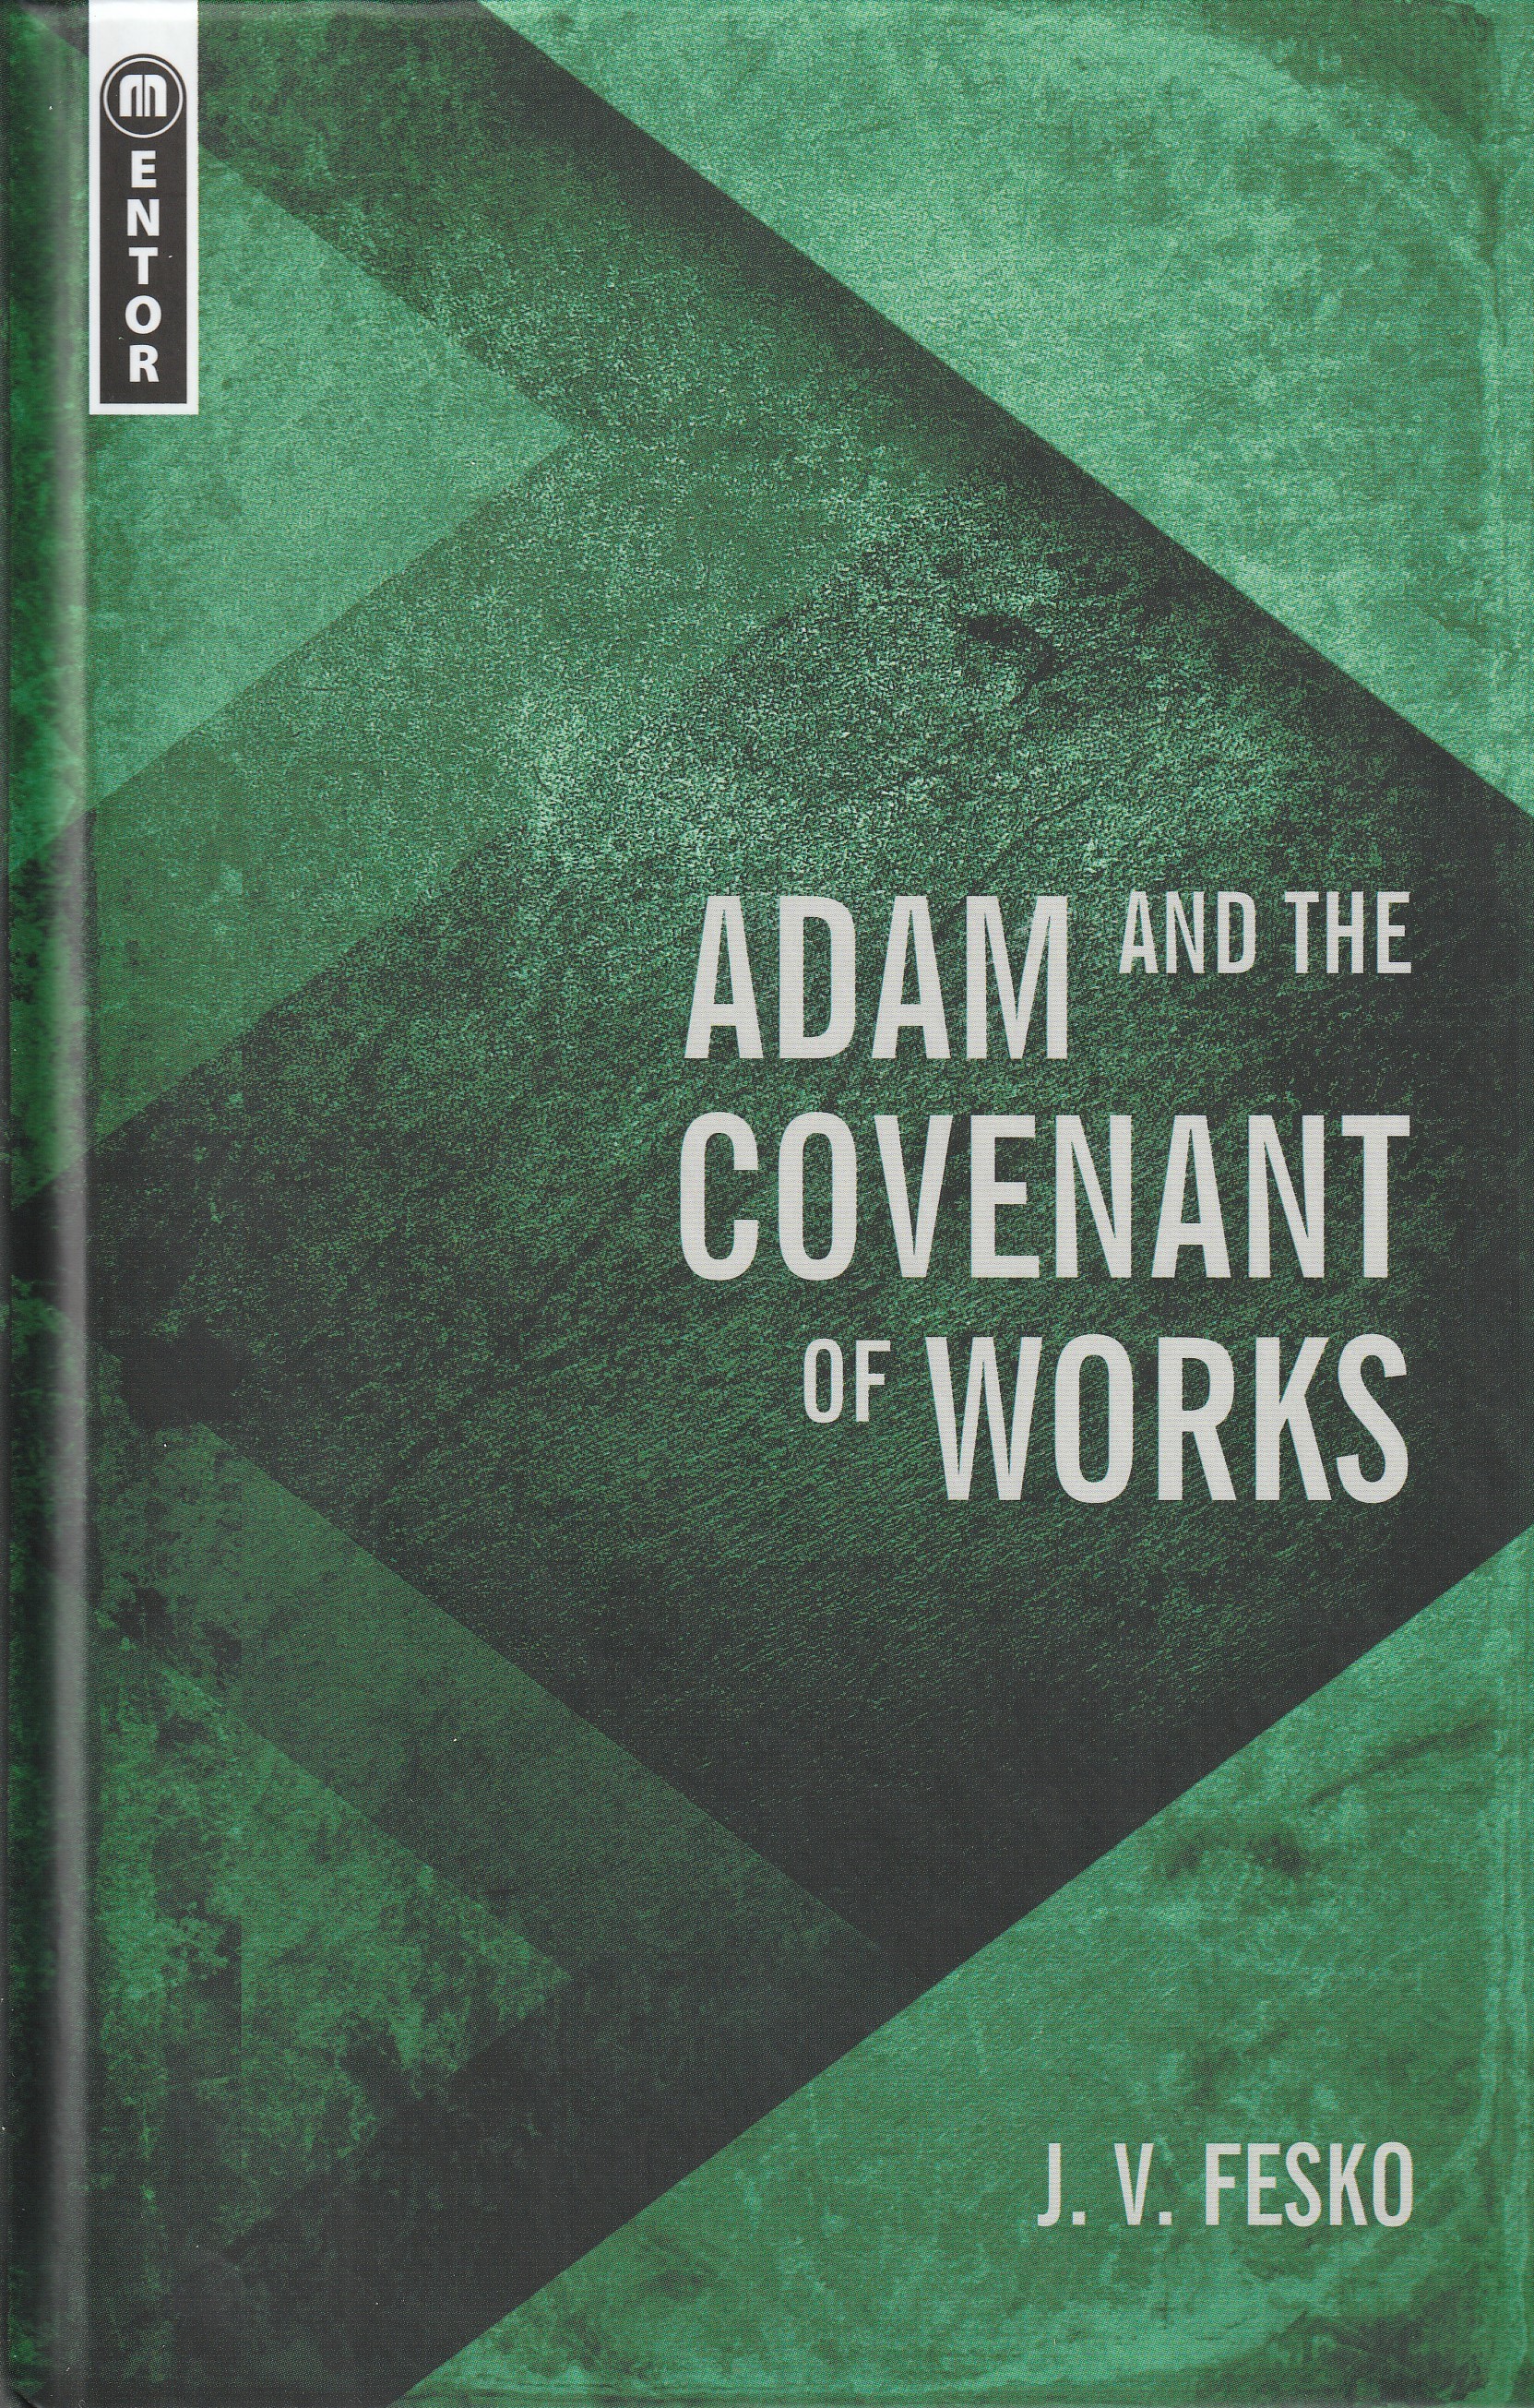 Adam and the Covenant of Works